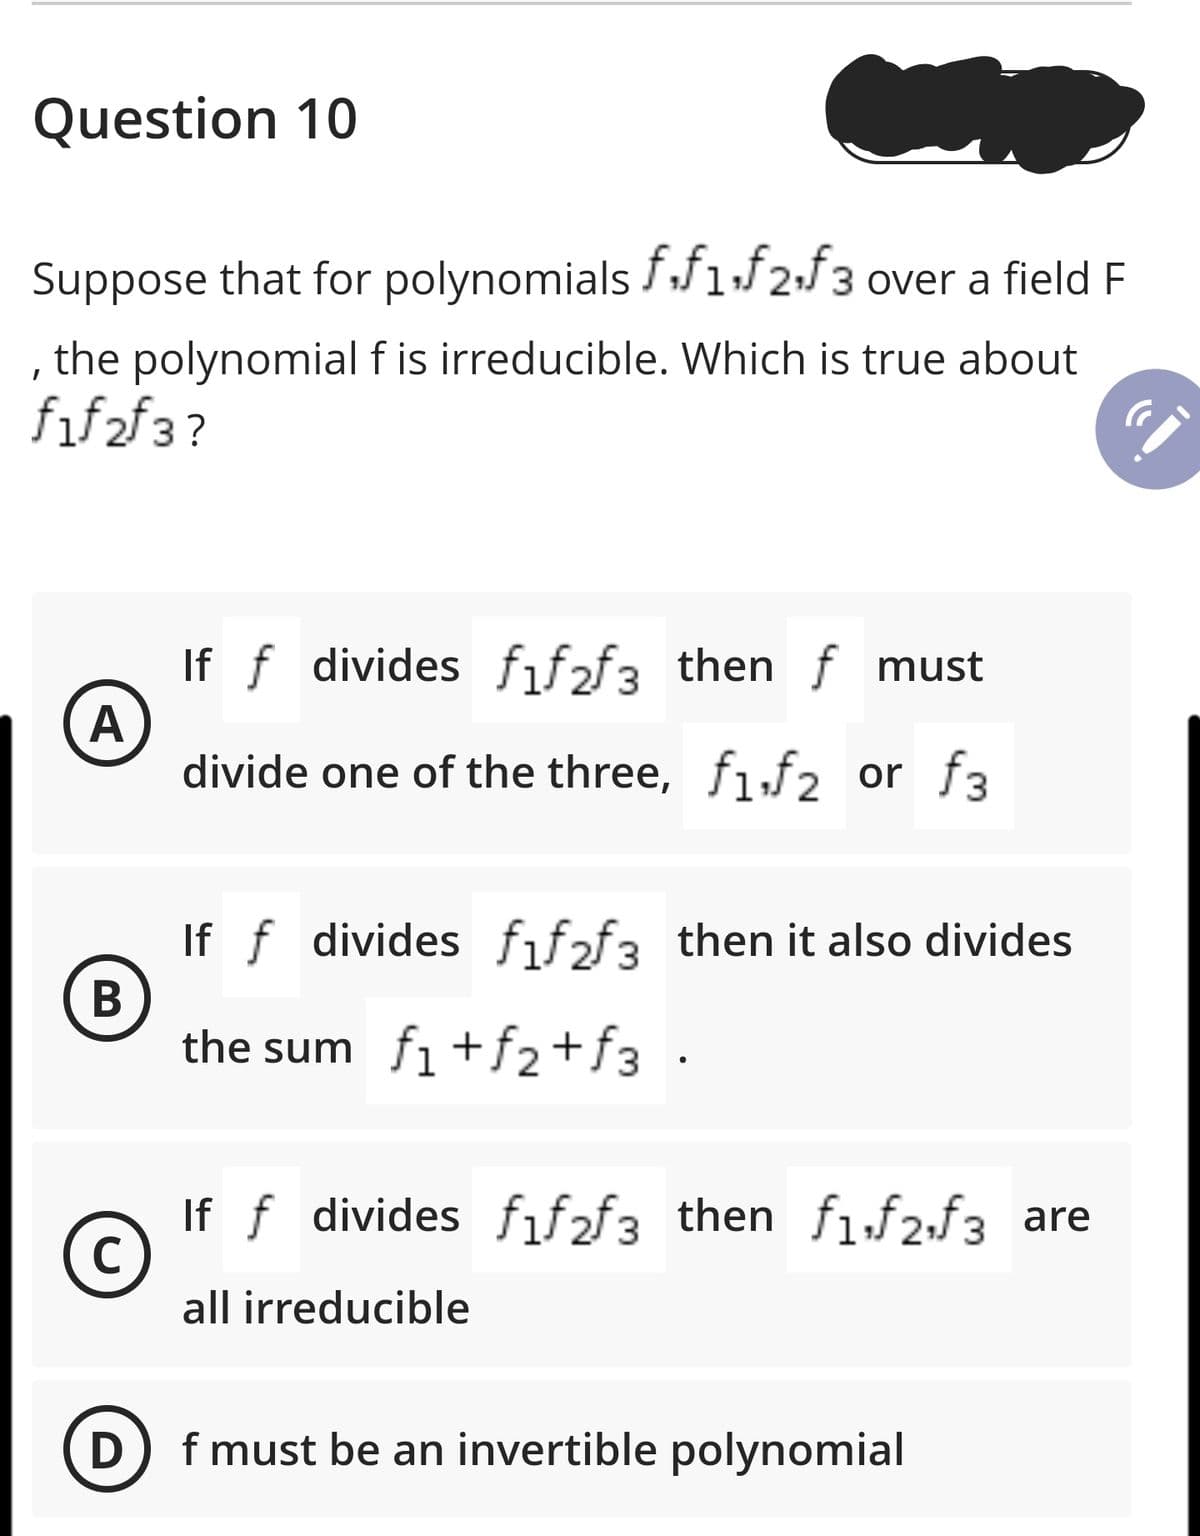 Question 10
Suppose that for polynomials ff1f2;f3 over a field F
the polynomial f is irreducible. Which is true about
fif2f3?
If f divides fif2f3 then f must
А
divide one of the three, f1,f2 or f3
If f divides fif2f3 then it also divides
В
the sum fi +f2+f3 •
If f divides fıf2f3 then f1,f2,f3 are
all irreducible
D
f must be an invertible polynomial
